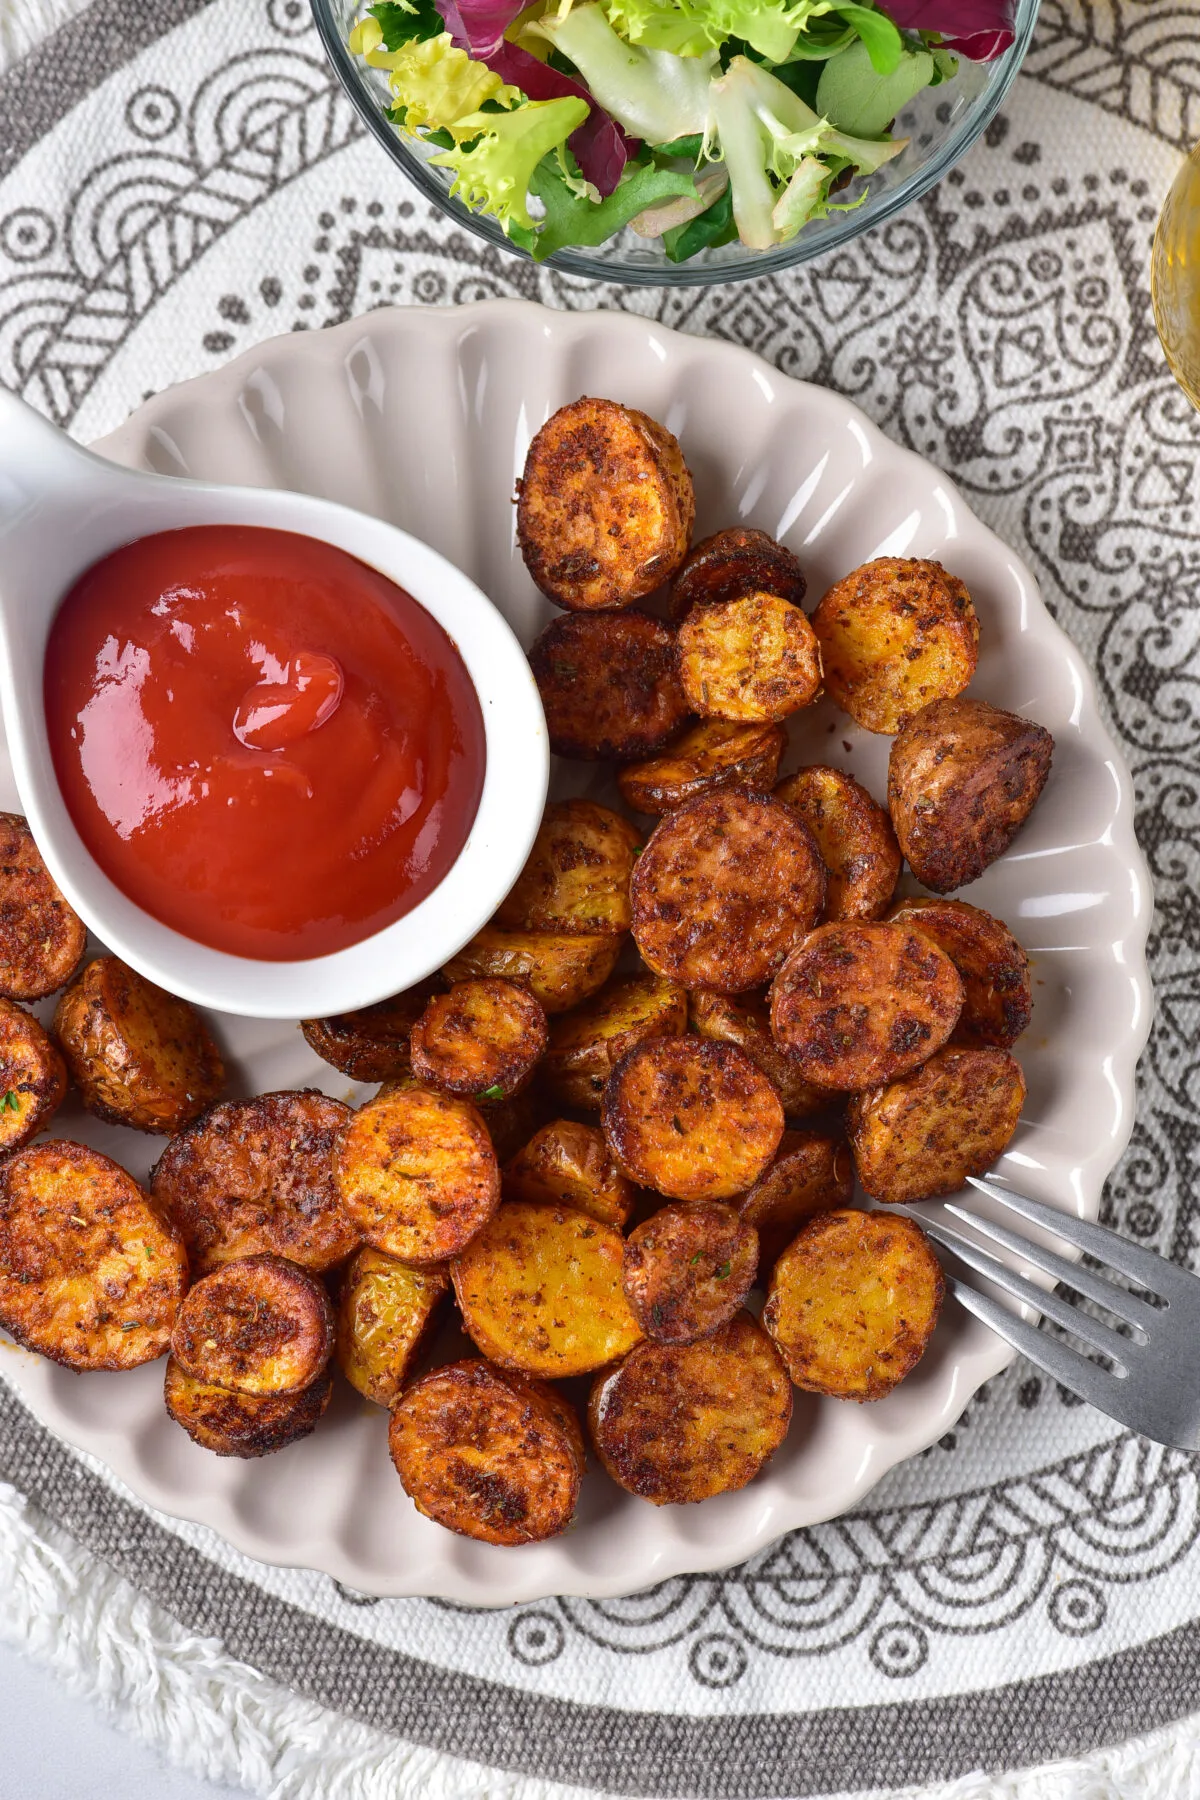 These air fryer baby potatoes are the perfect easy side dish for any meal! They're crispy, delicious, and so easy to make.